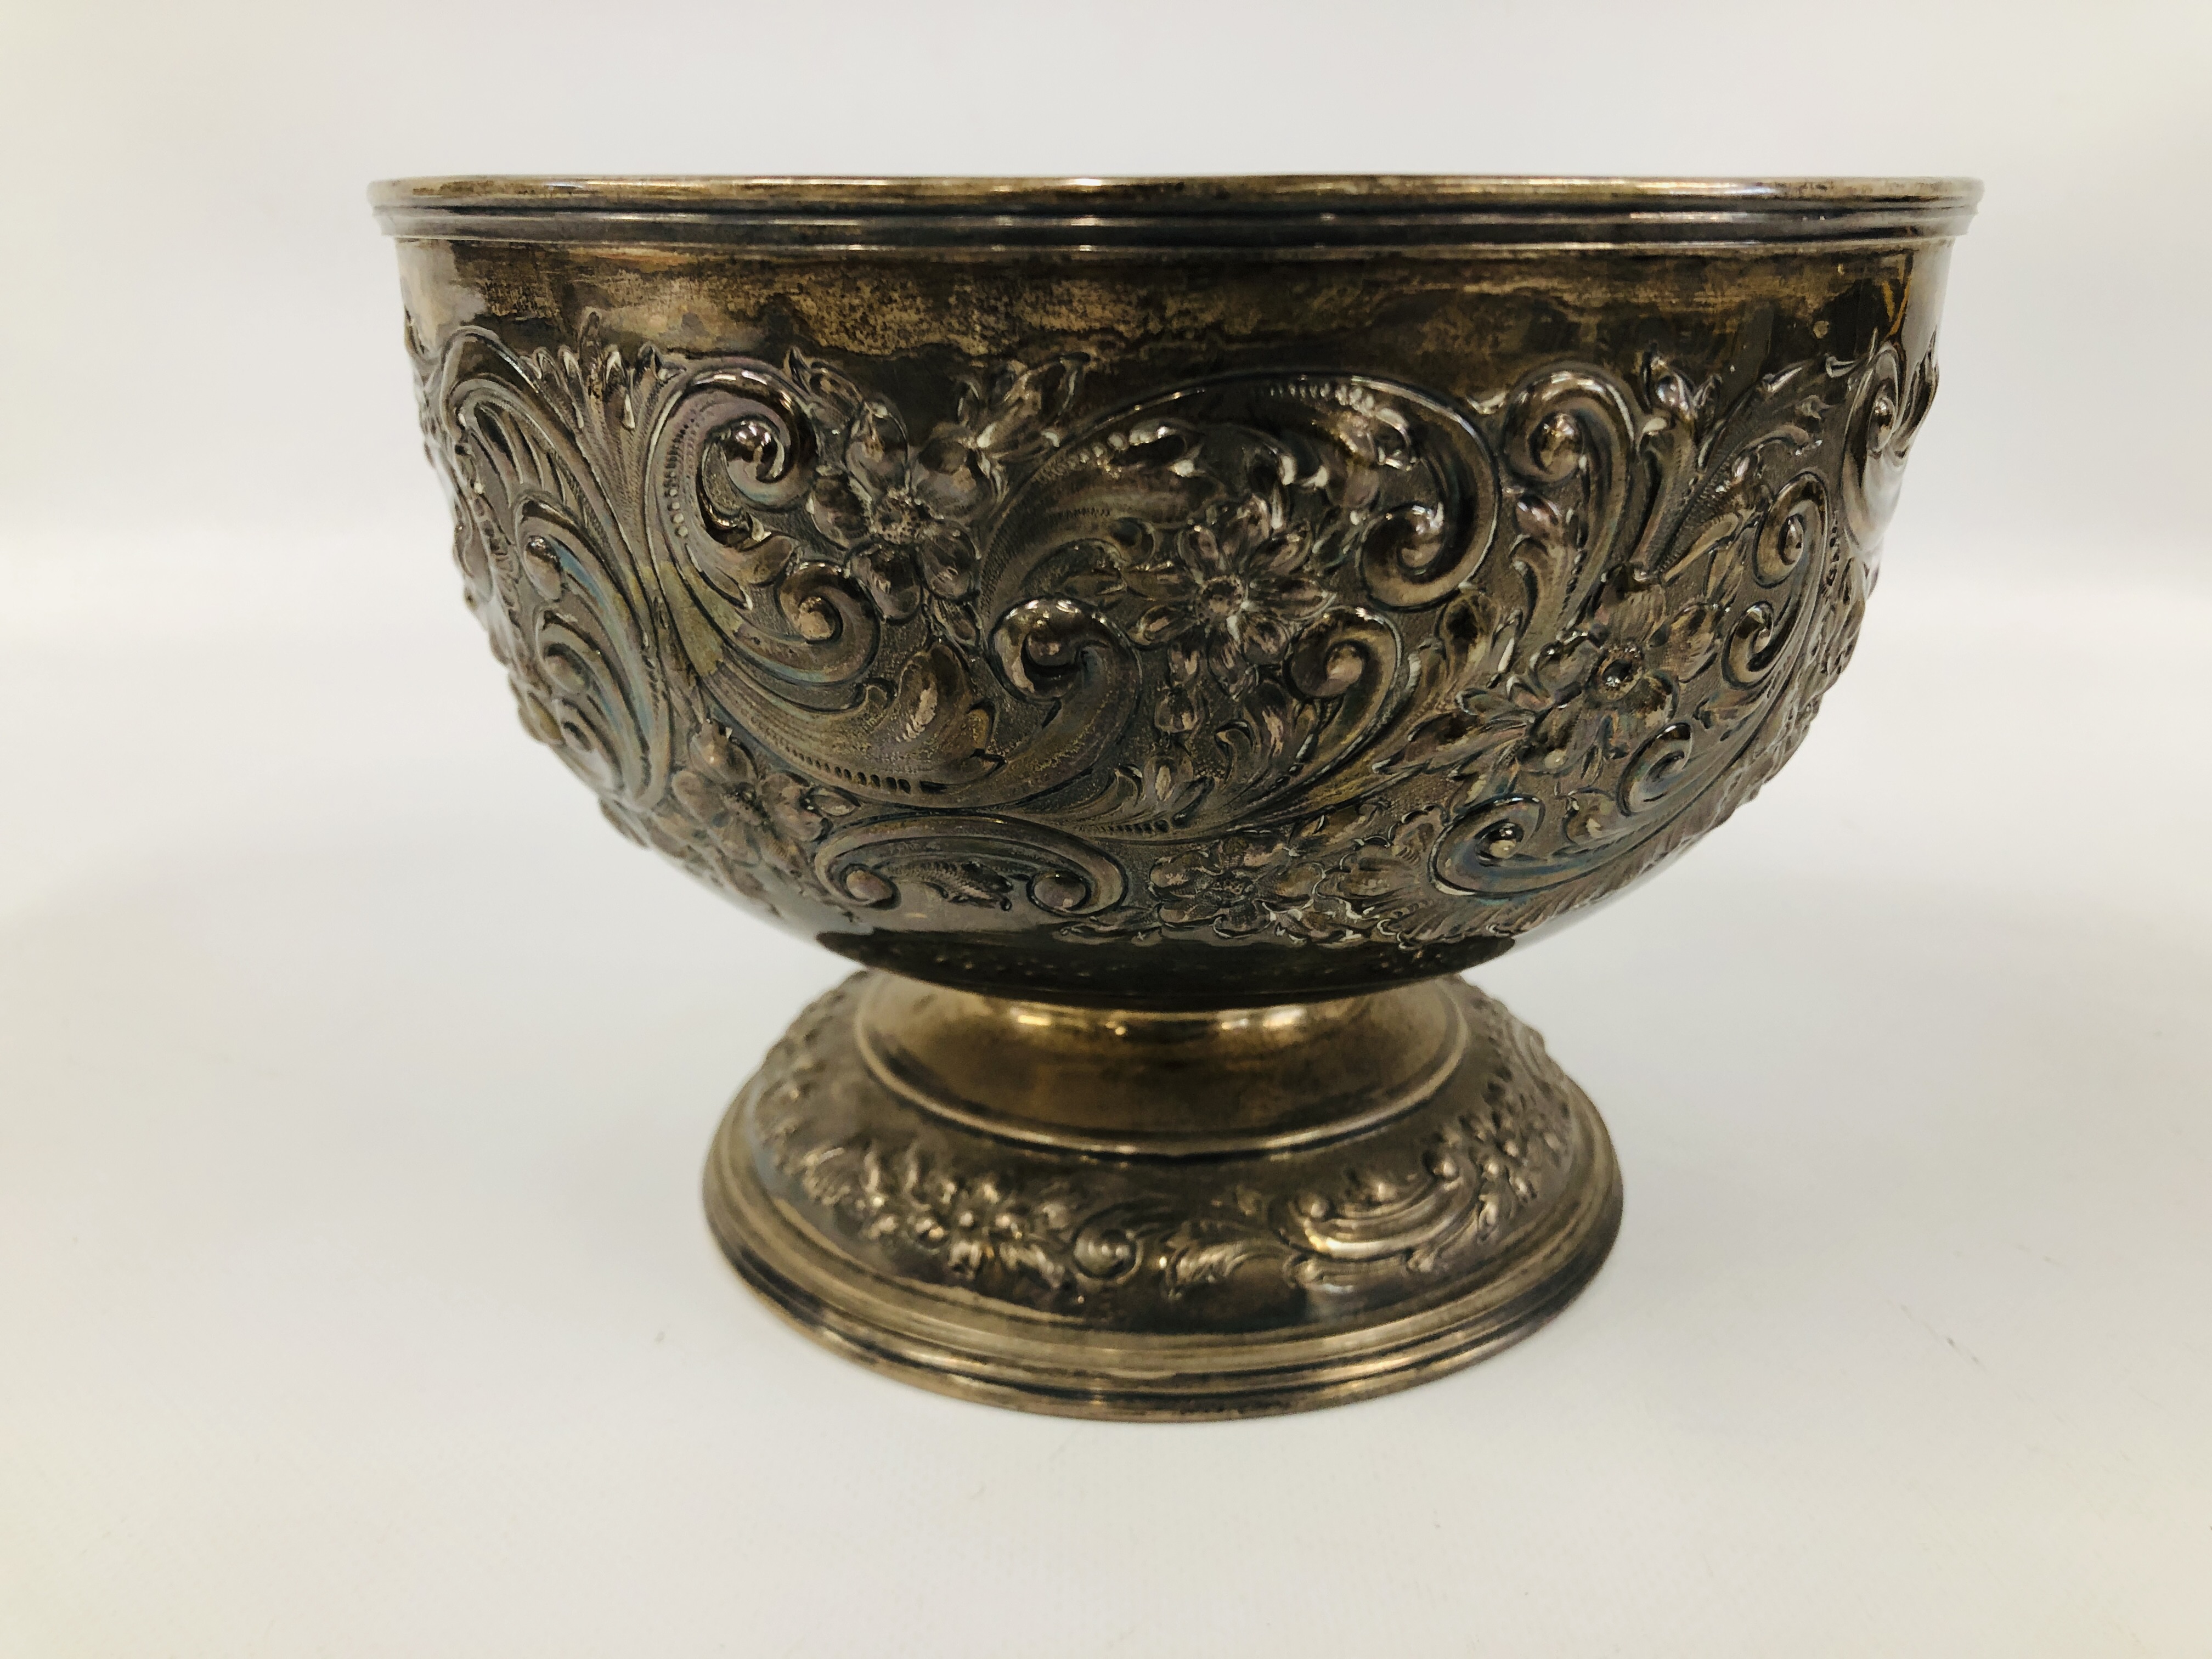 FOOTED CIRCULAR SILVER ROSE BOWL THE BODY WITH SCROLL AND FLOWER DECORATION SHEFFIELD 1912 WIDTH - Image 5 of 9